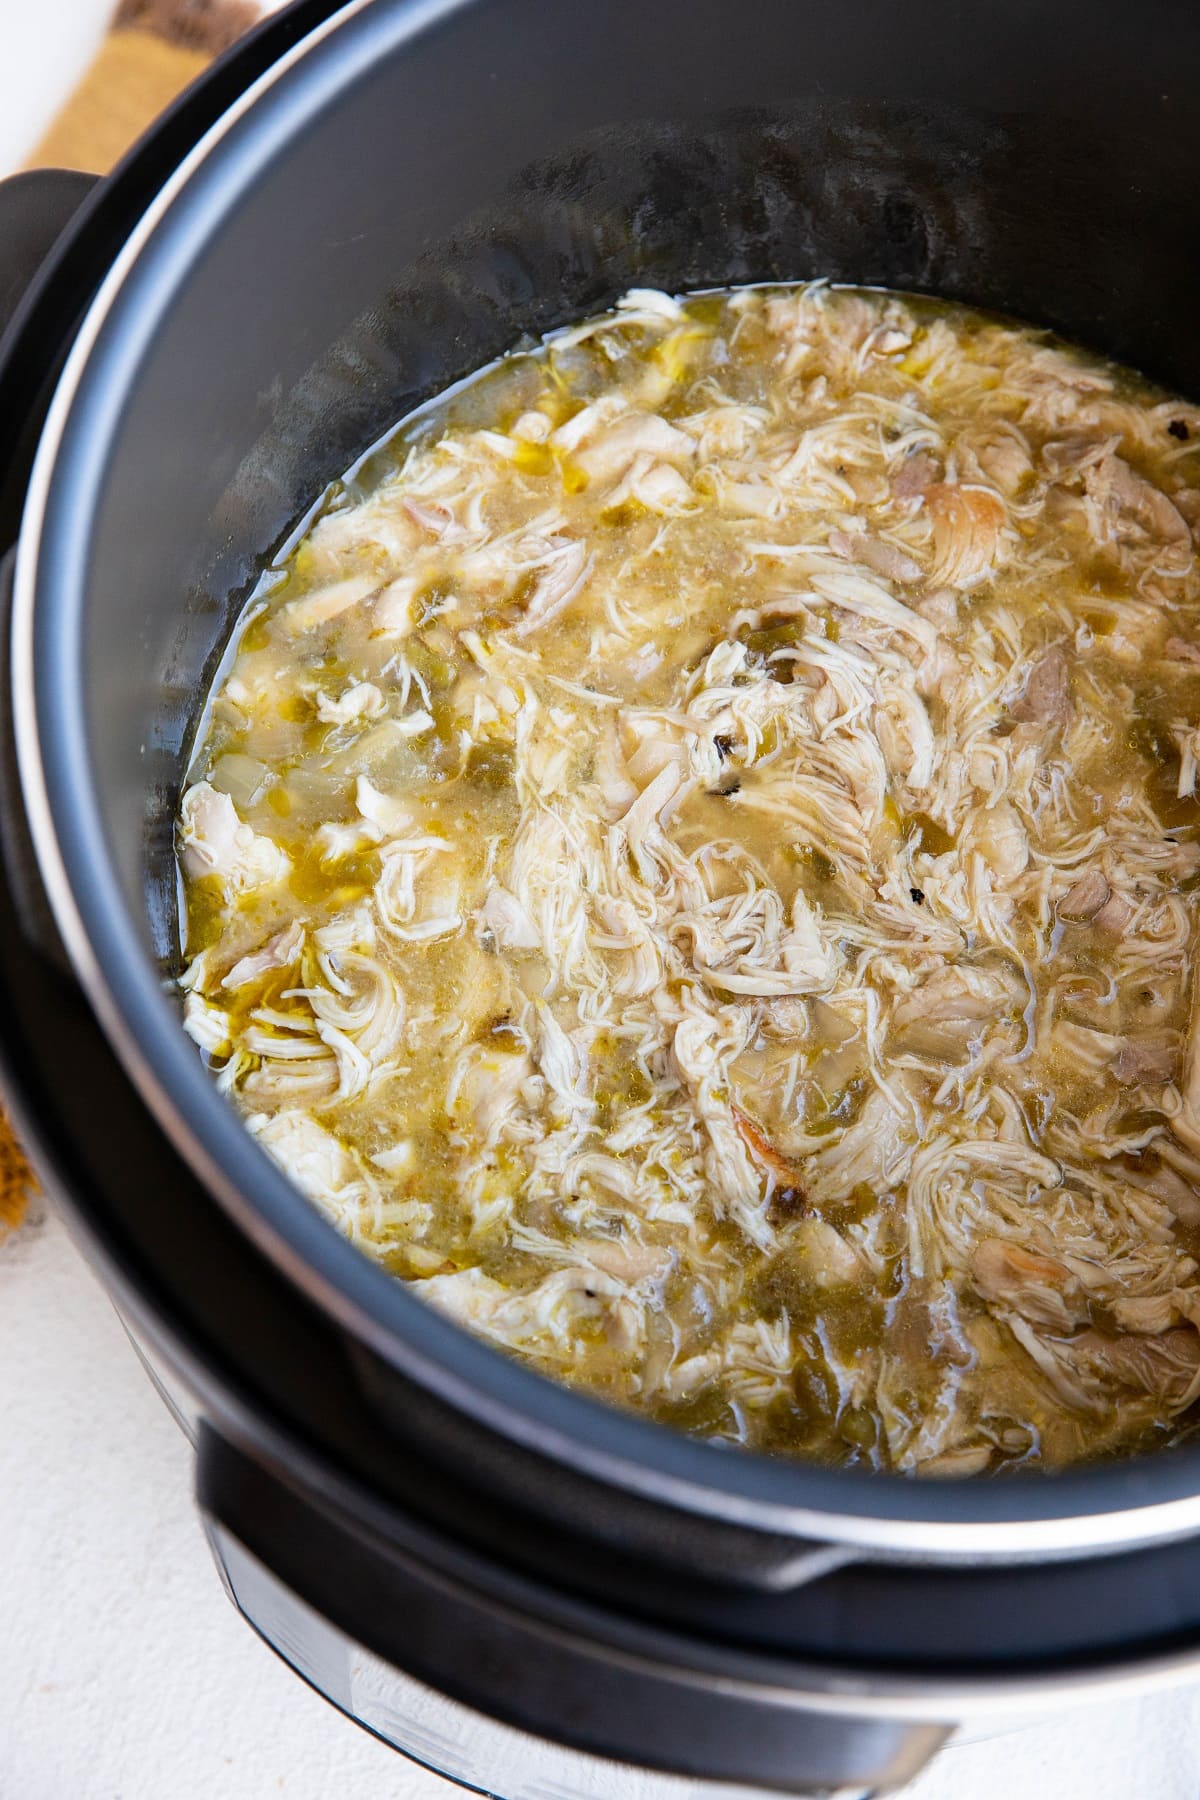 Instant Pot full of shredded chicken in green sauce for tacos or burritos.